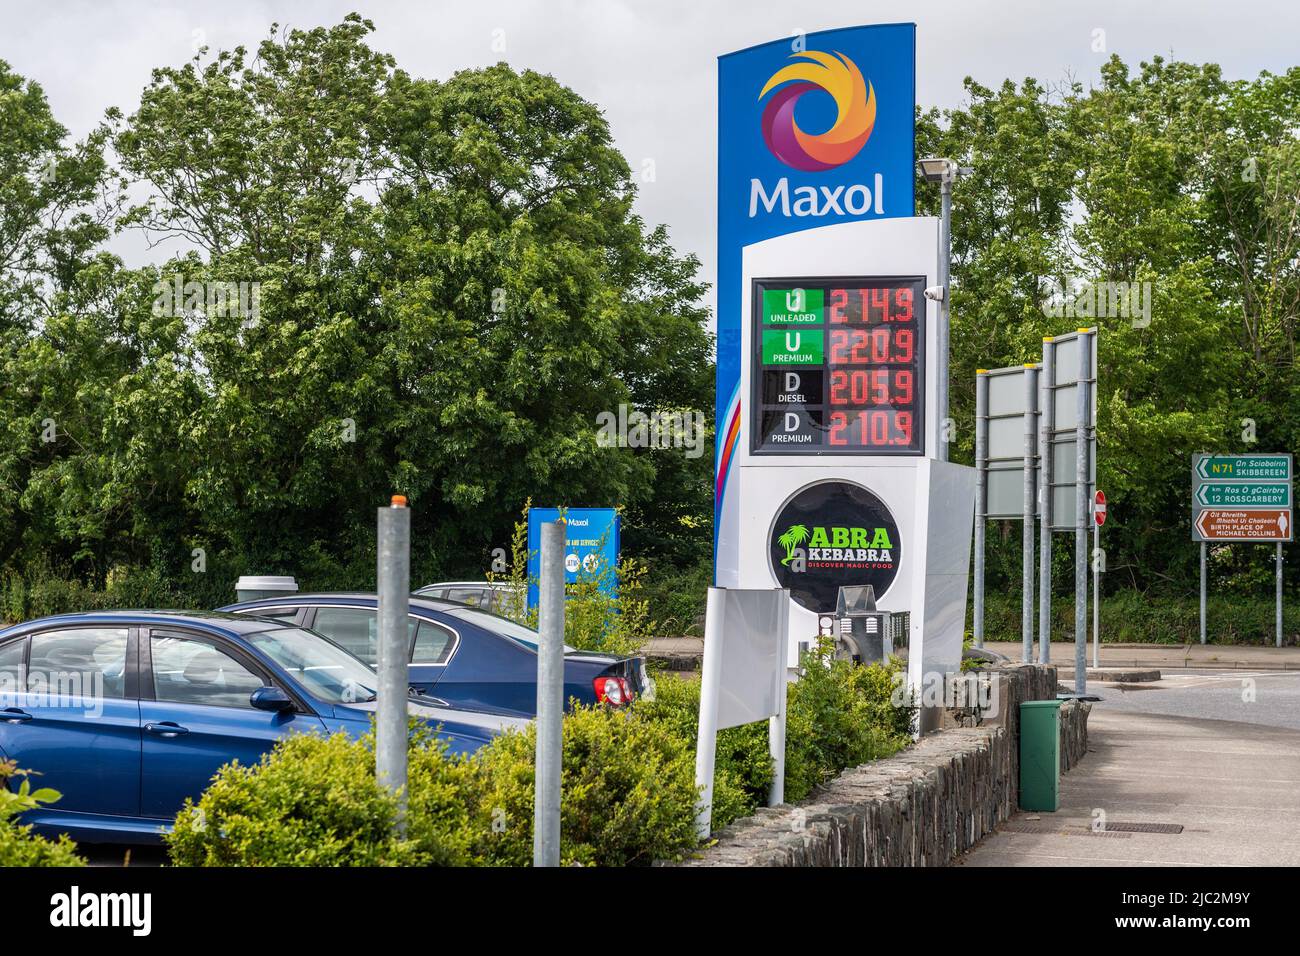 Clonakilty, West Cork, Ireland. 9th June, 2022. The price of petrol and diesel has soared to well over €2 per litre. The Maxol garage in Clonakilty was selling diesel at €2.05.9 per litre and €2.14.9 per litre today. Credit: AG News/Alamy Live News Stock Photo